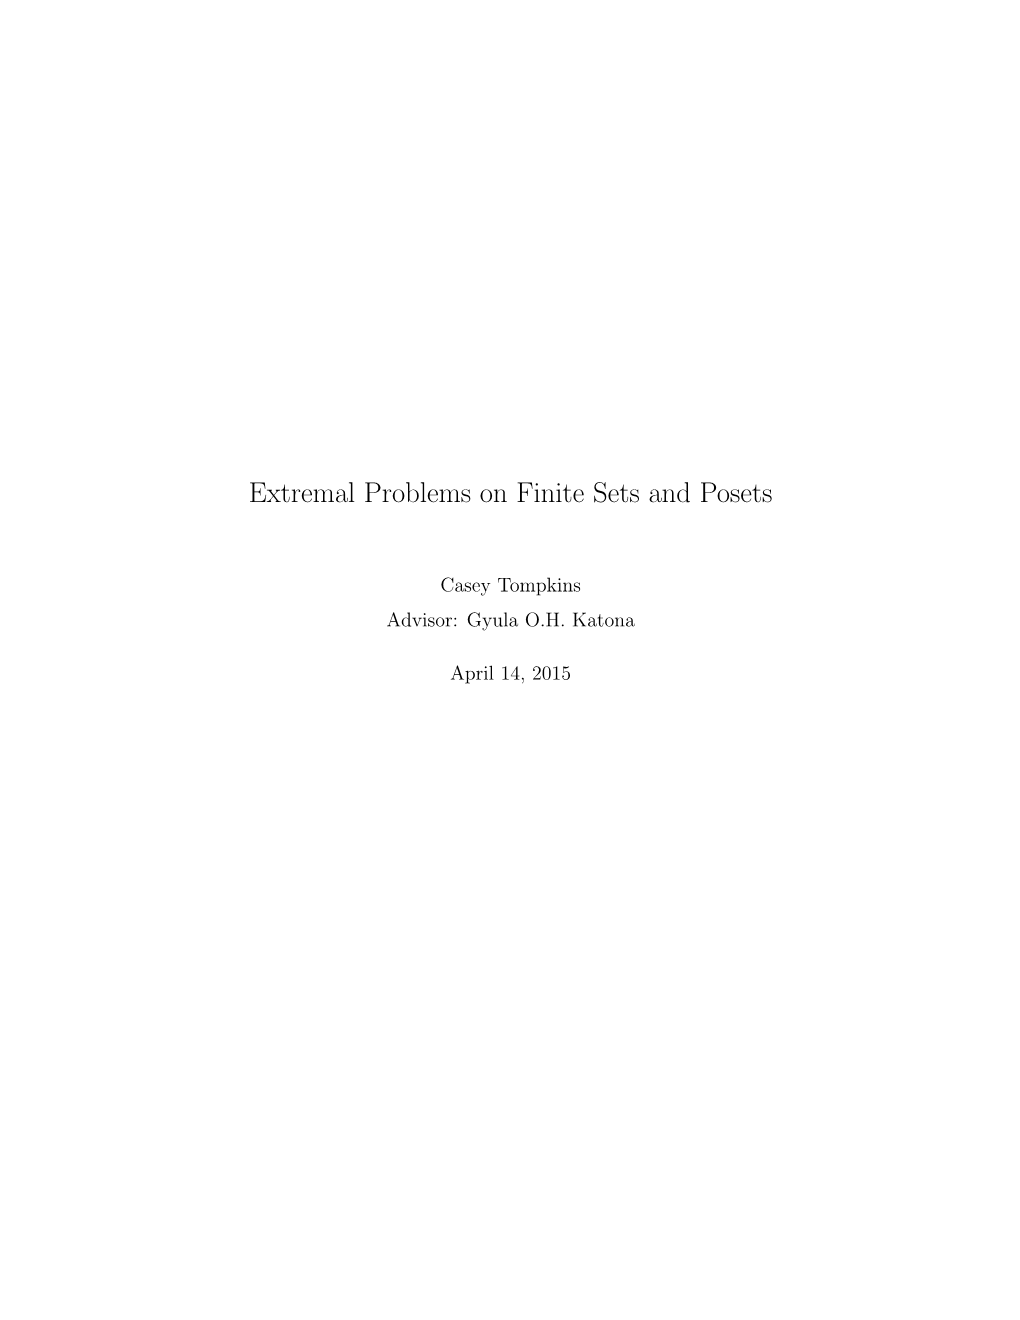 Extremal Problems on Finite Sets and Posets